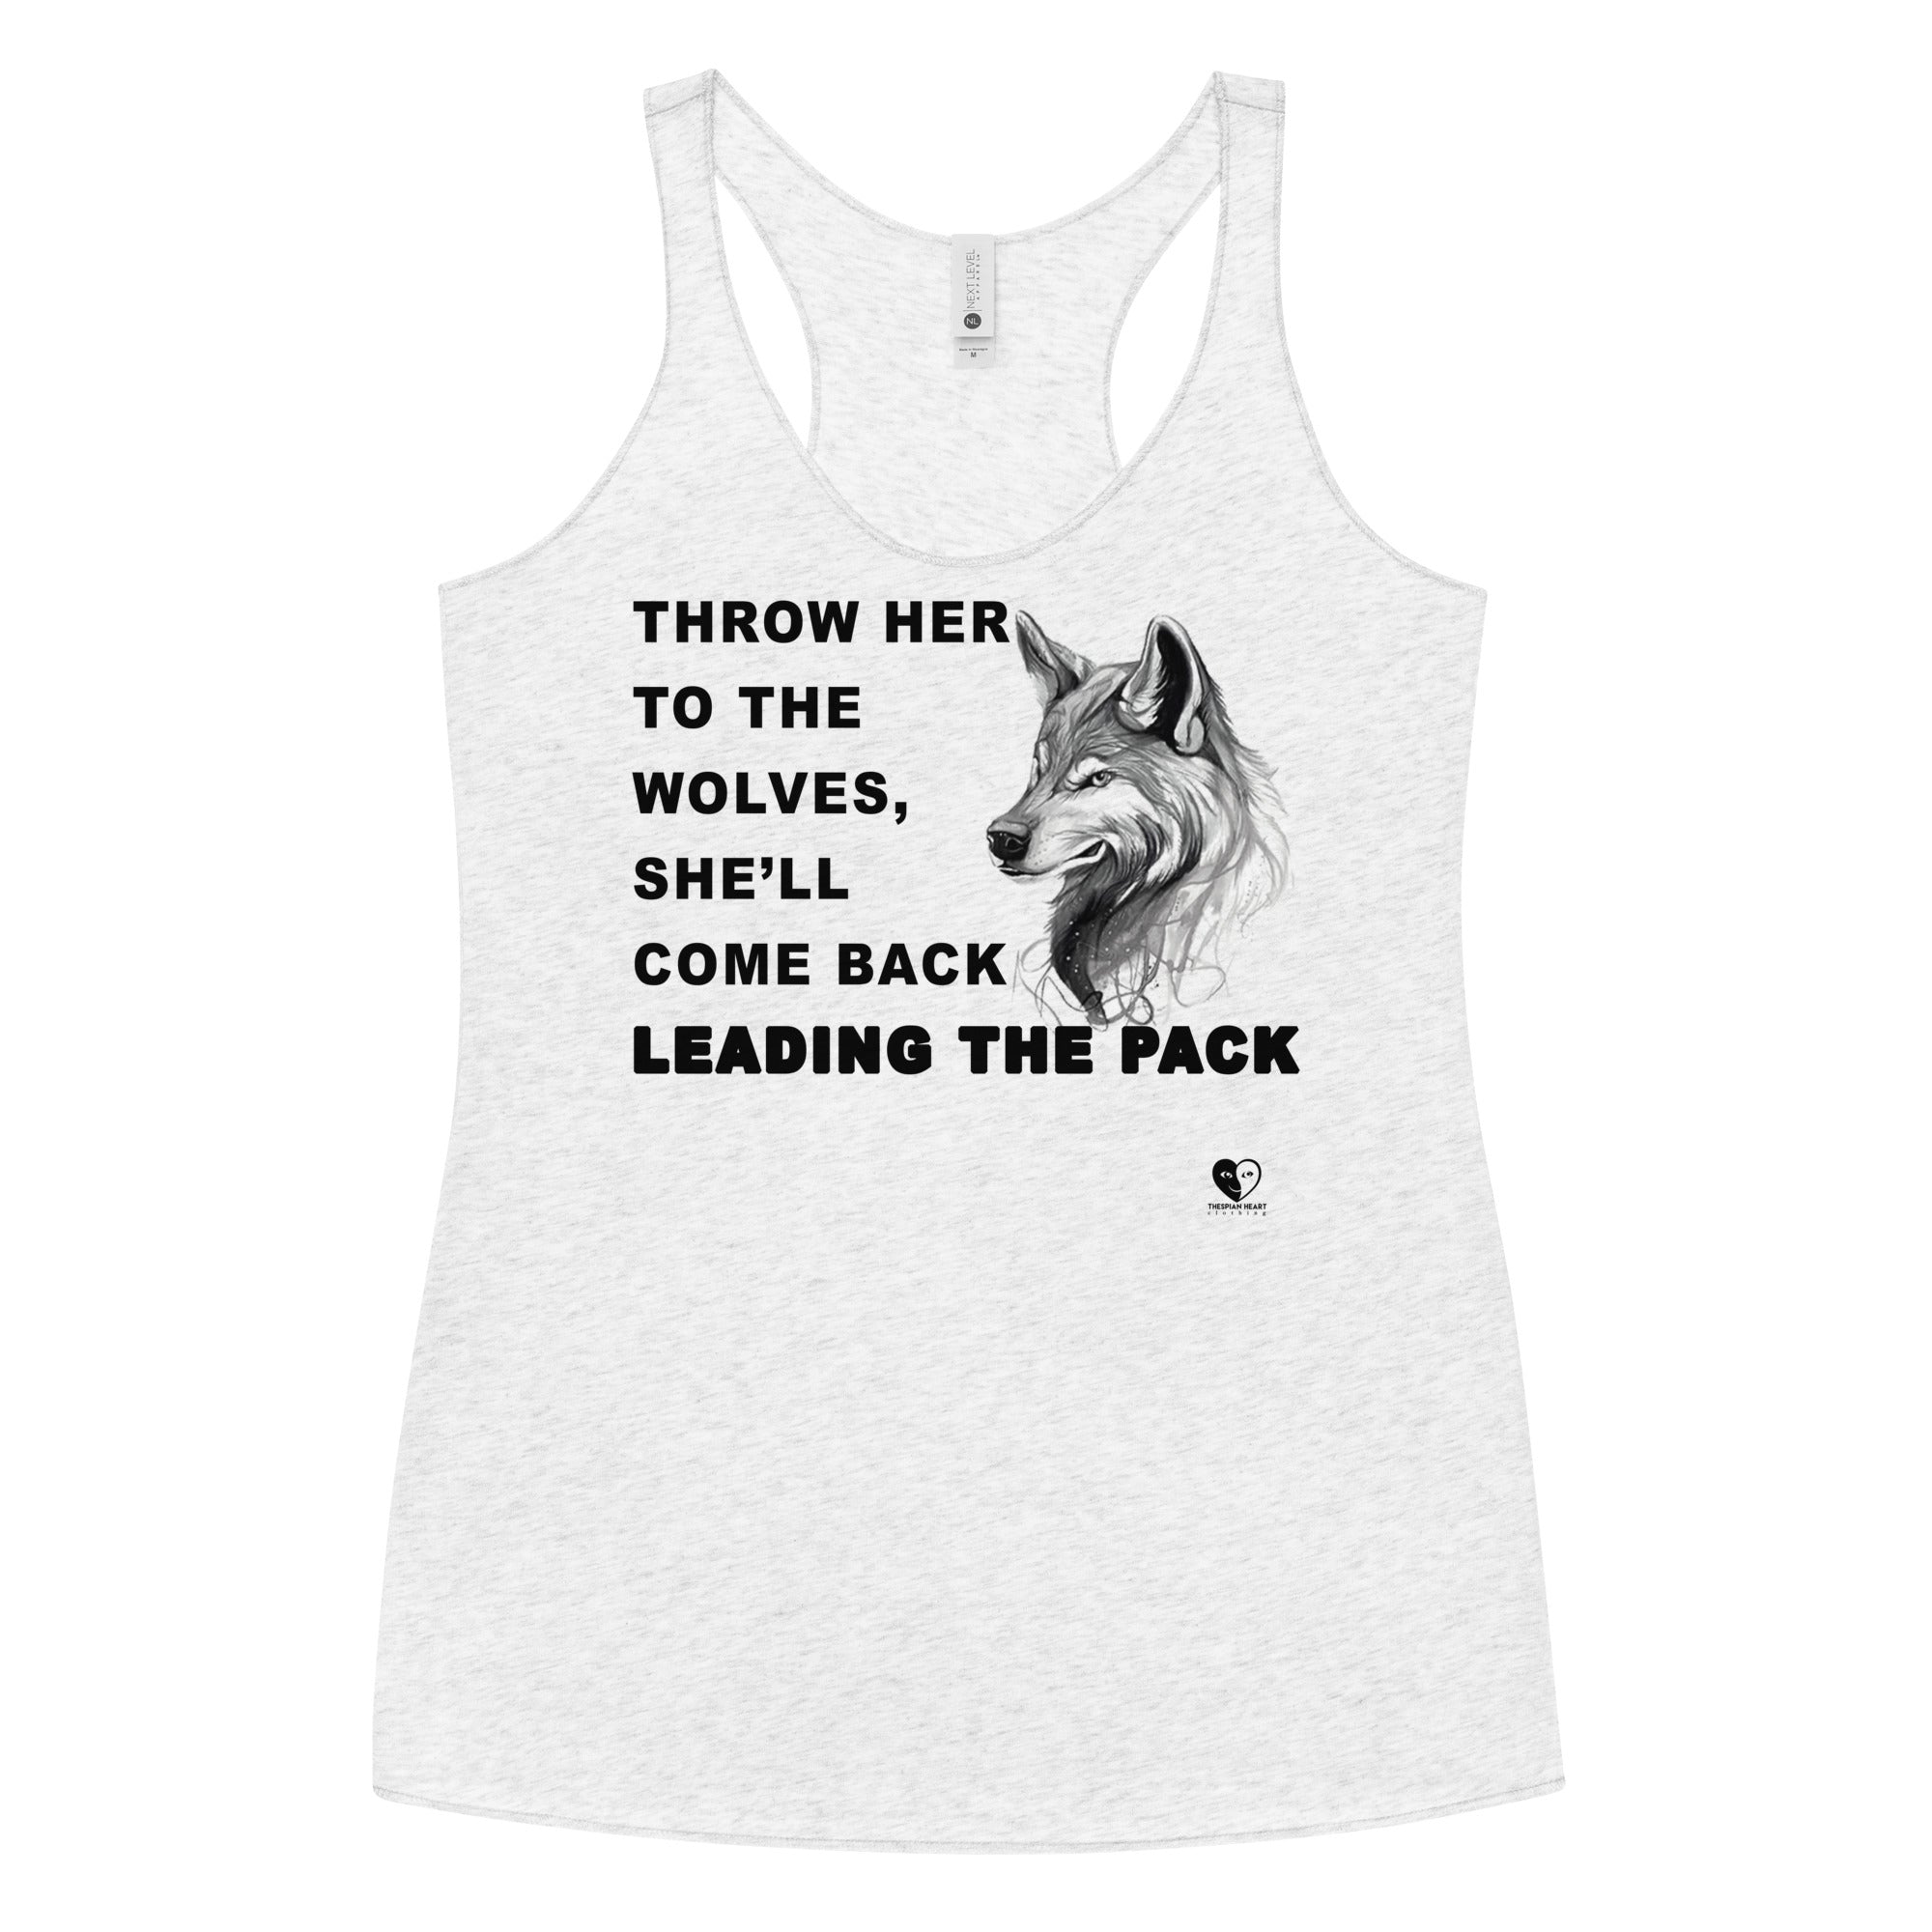 Leading The Pack - Women's Racerback Tank Top